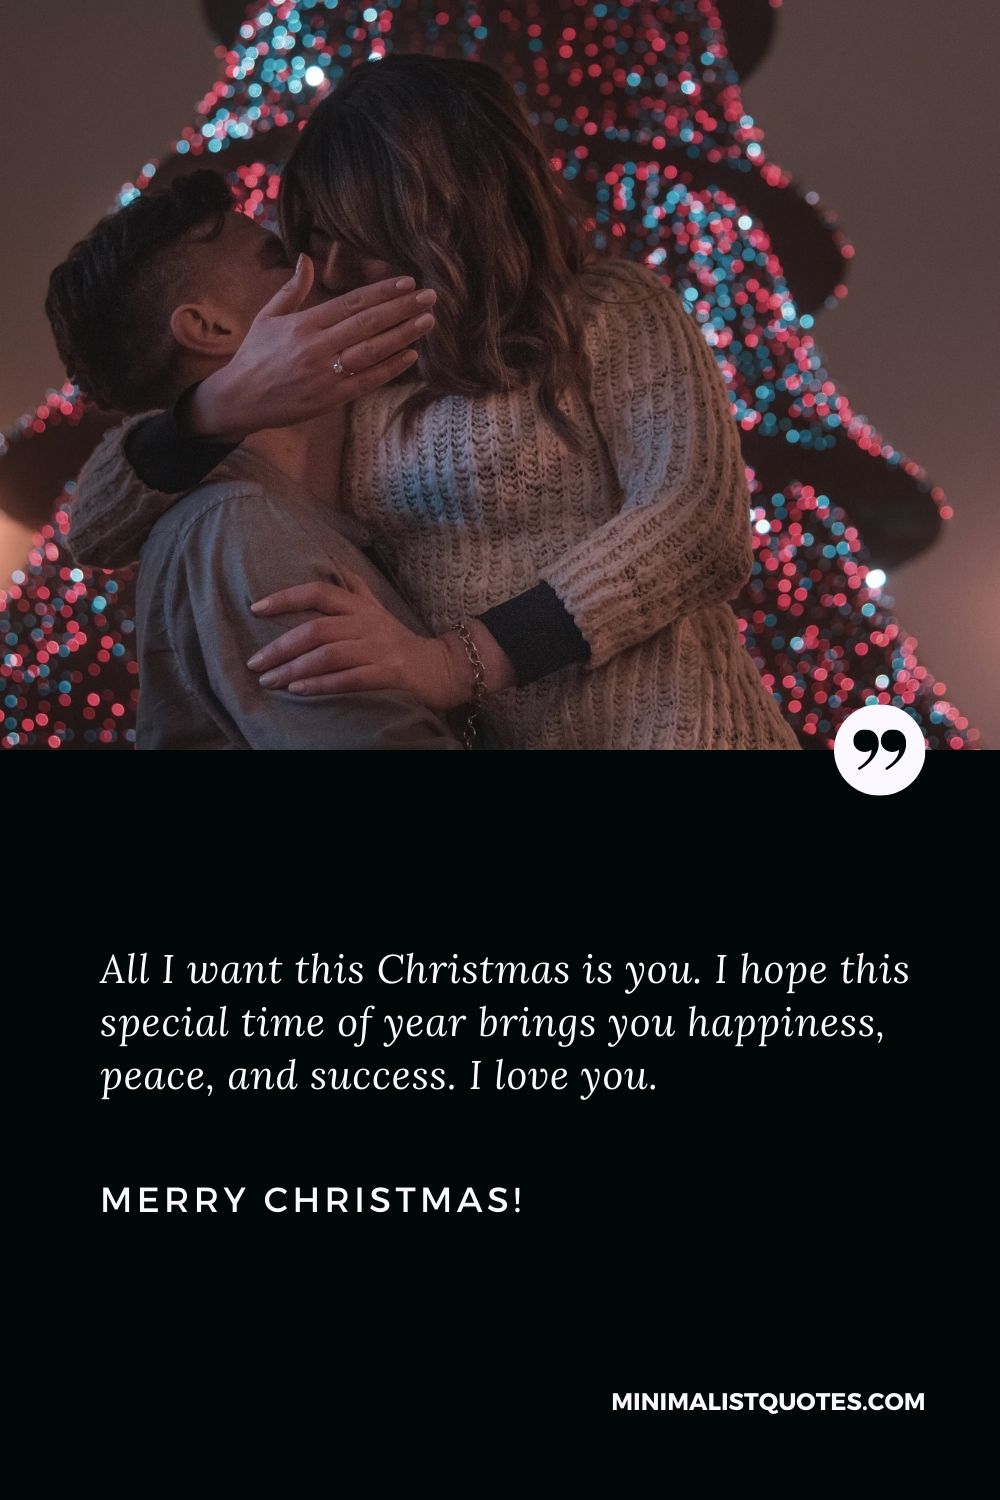 Merry Christmas my love: All I want this Christmas is you. I hope this special time of year brings you happiness, peace, and success. I love you. Merry Christmas!